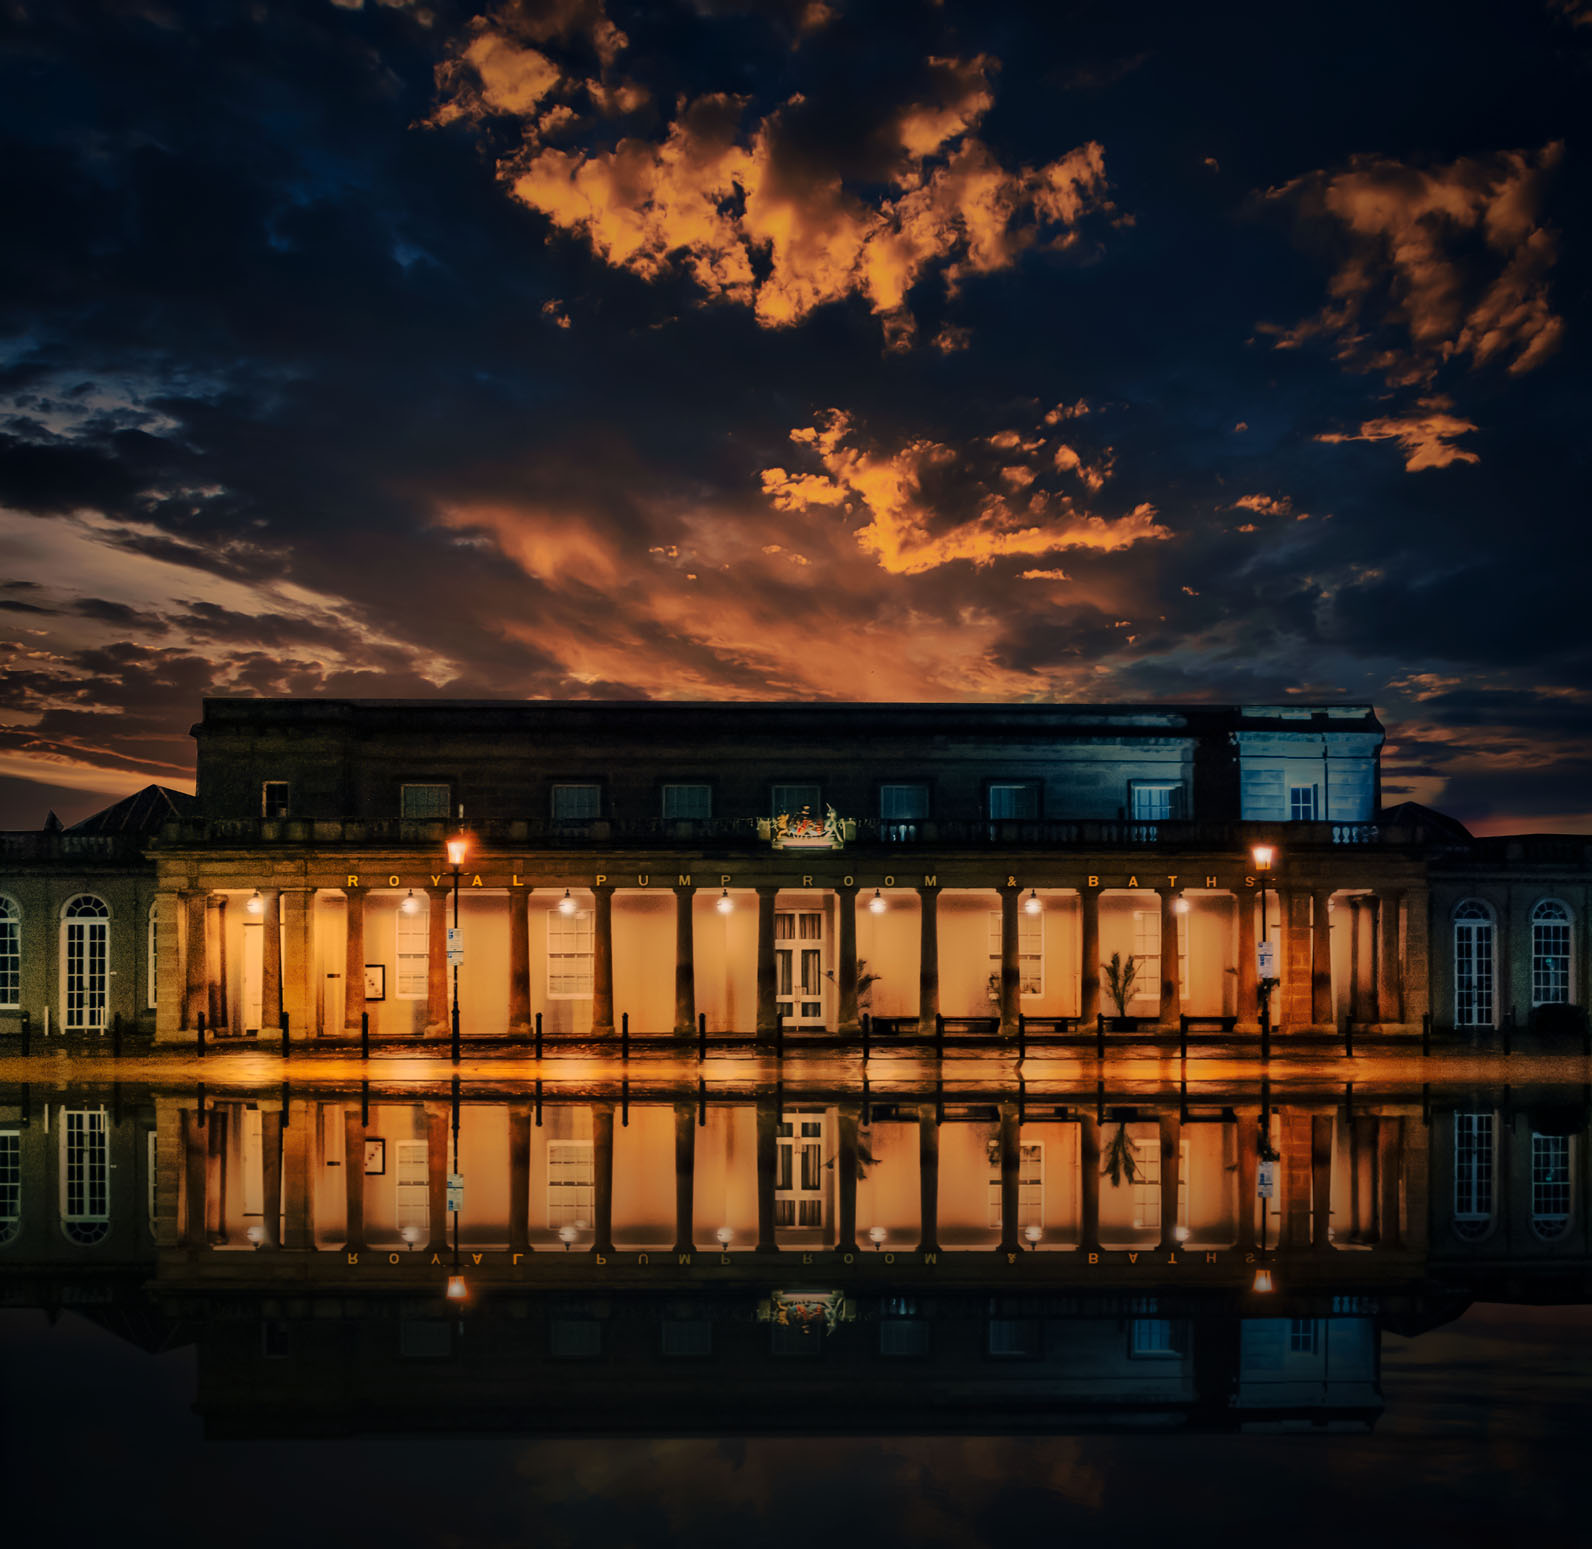 The Pump Rooms by Brian Roe